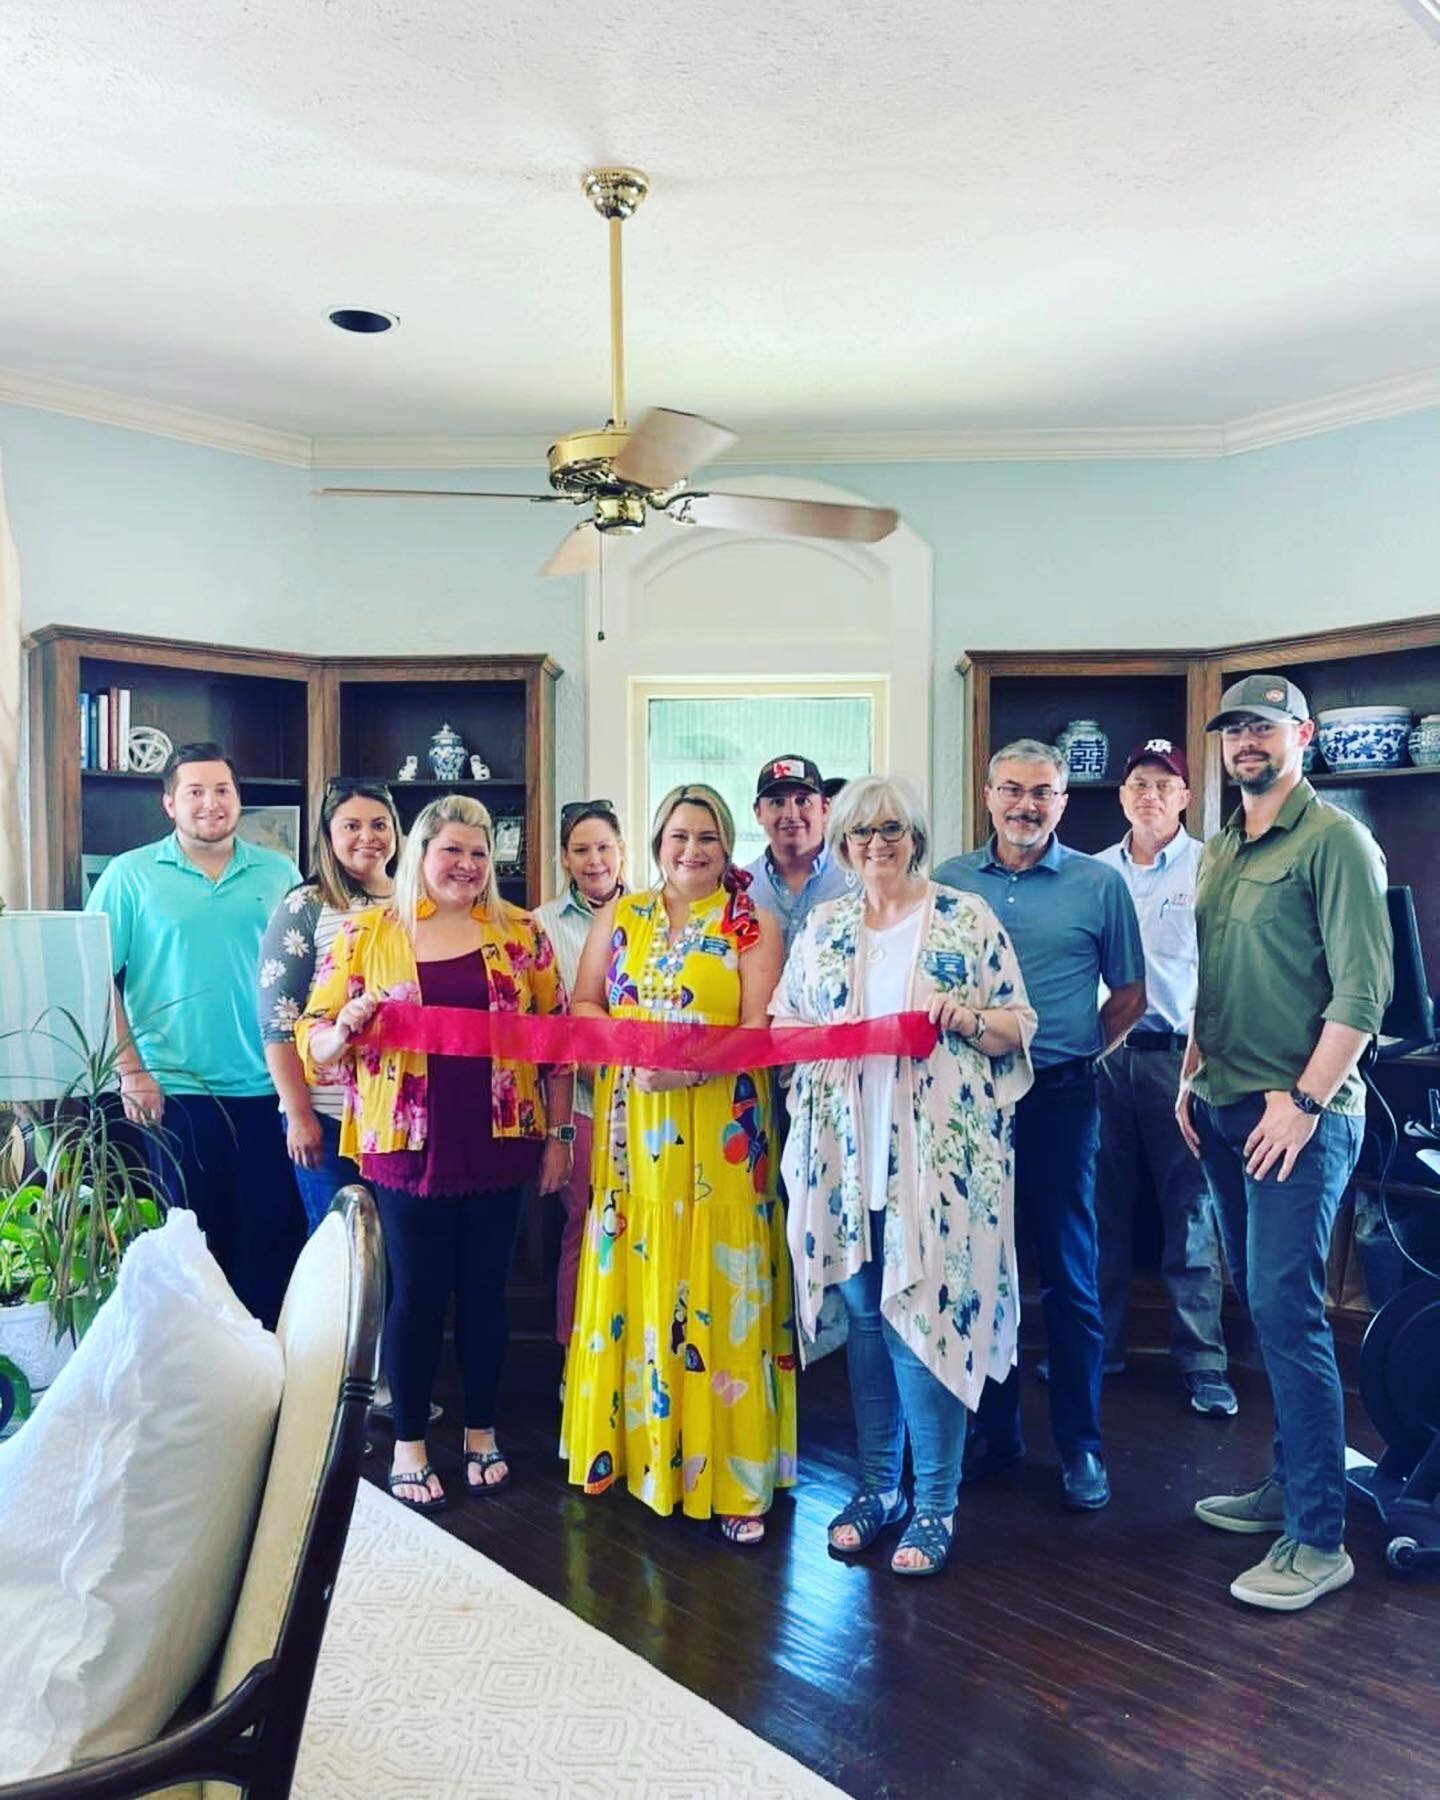 Hip, hip, hooray! The @vivantideas office is officially open! Thank you to the #mineolachamberofcommerce for hosting the ribbon cutting, @bella_floral_quitman for the gorgeous florals, @getbakedbychristina for the tasty sweets, and to my mama for mak